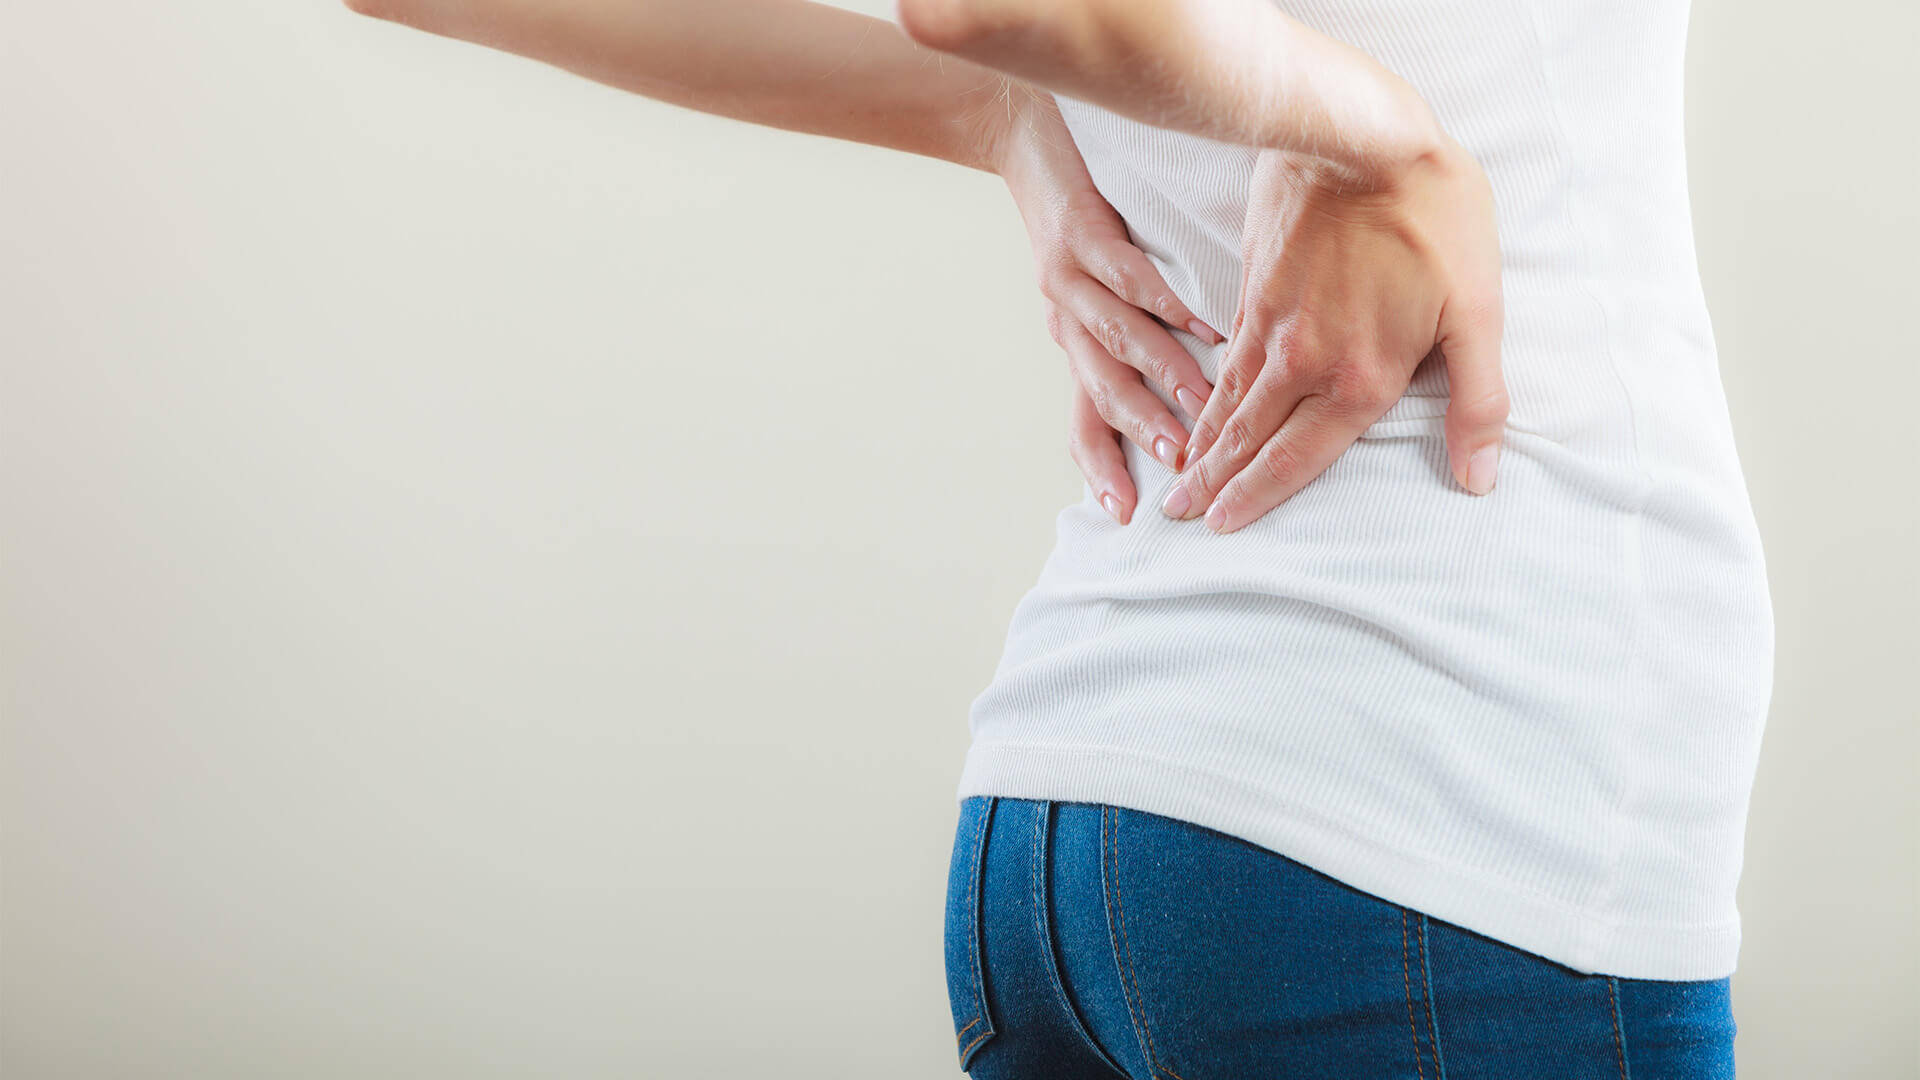 Top Tips to Relieve a Sore Back